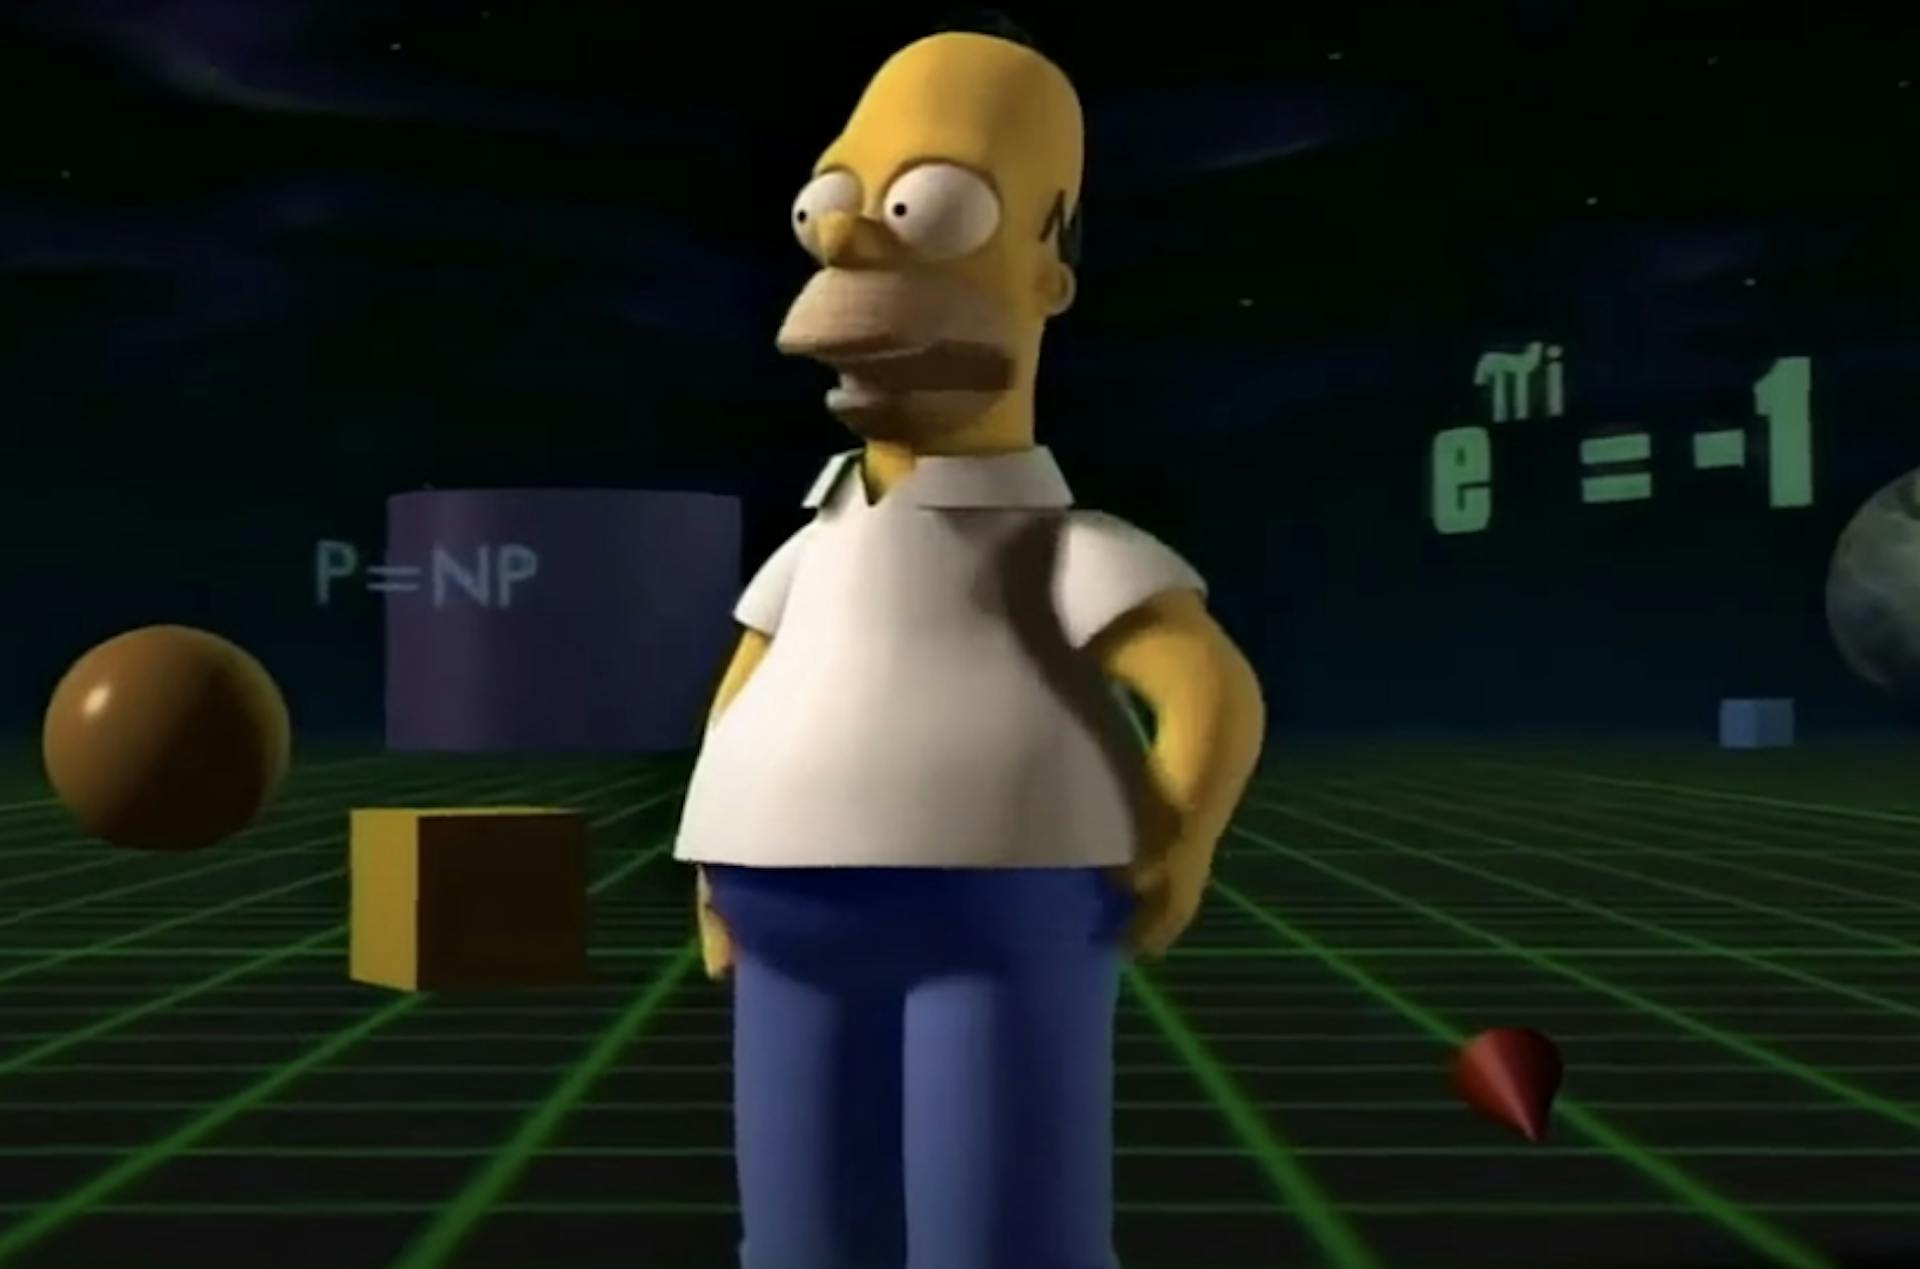 In the episode "Treehouse of Horror VI"  Homer stumbles into the third dimension and finds to answer to P vs NP